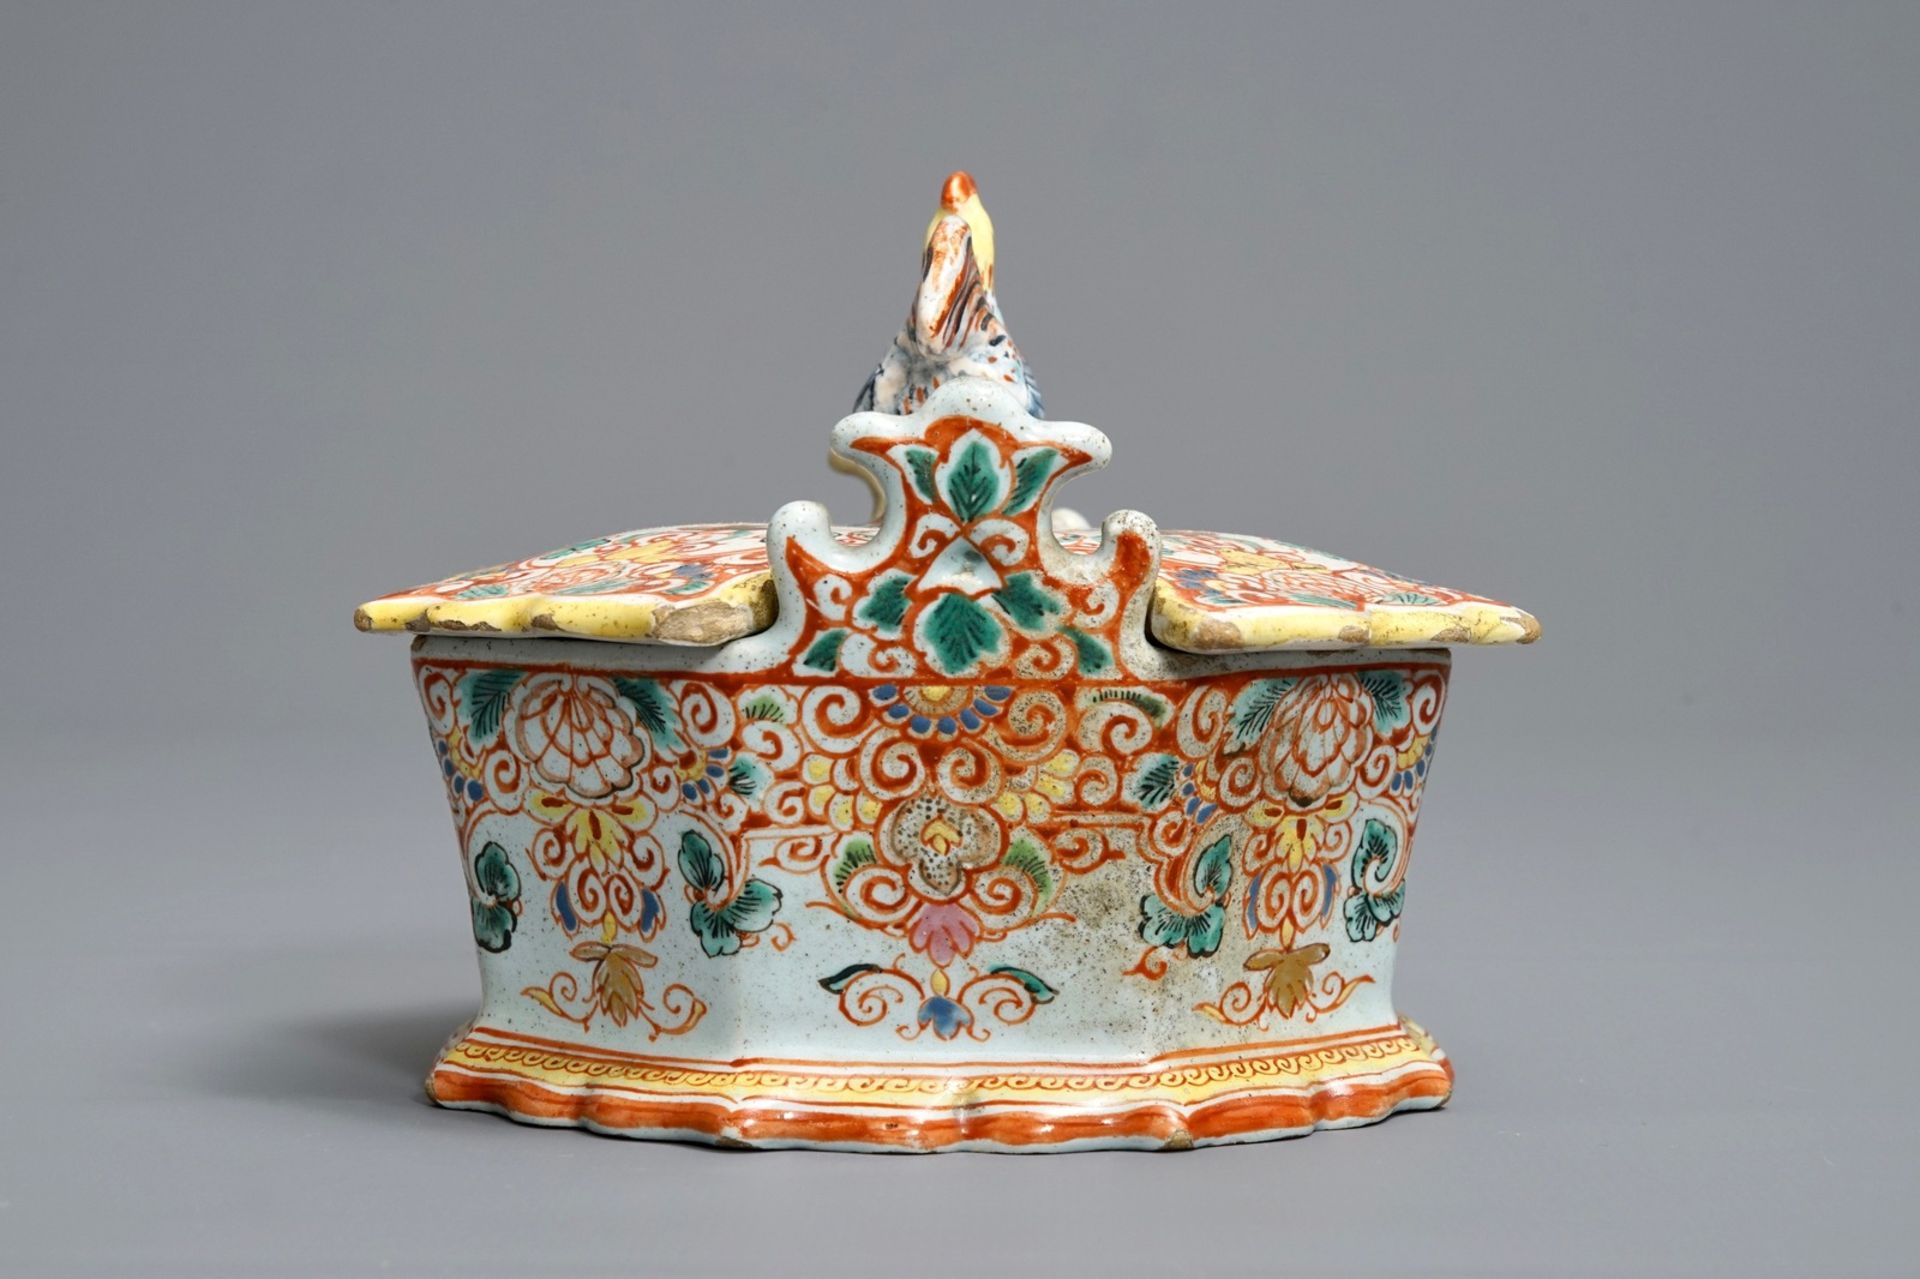 A polychrome petit feu and gilded Dutch Delft rooster-topped butter tub, 1st half 18th C. - Image 3 of 8